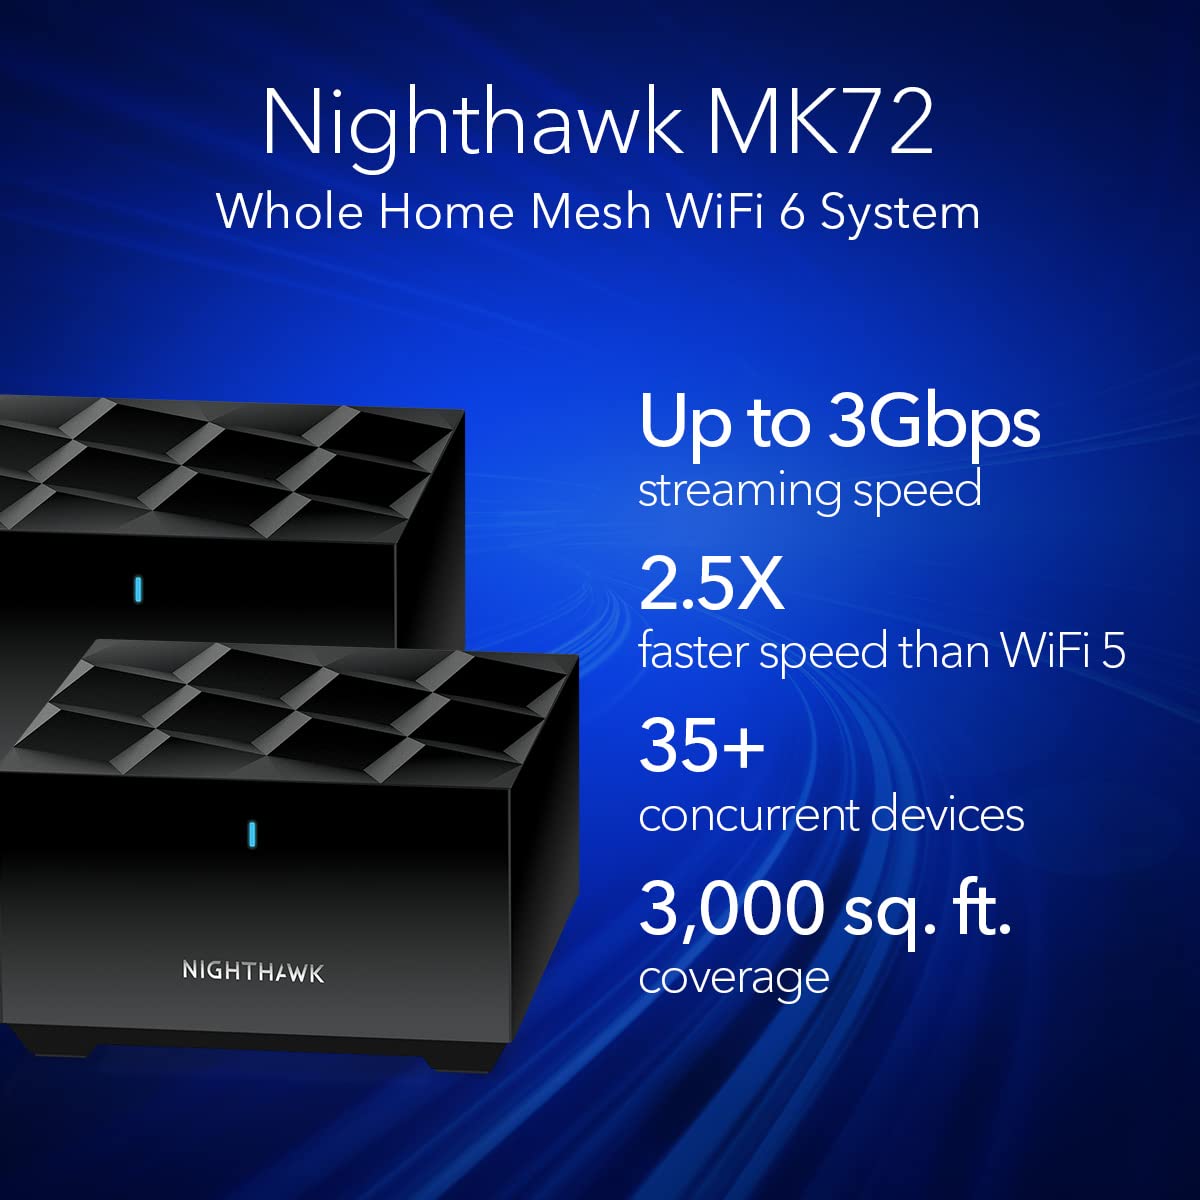 NETGEAR Nighthawk Advanced Whole Home Mesh WiFi 6 System (MK72)– AX3000 Router with 1 Satellite Extender, Coverage up to 3,000 sq. ft. and 35+ Devices